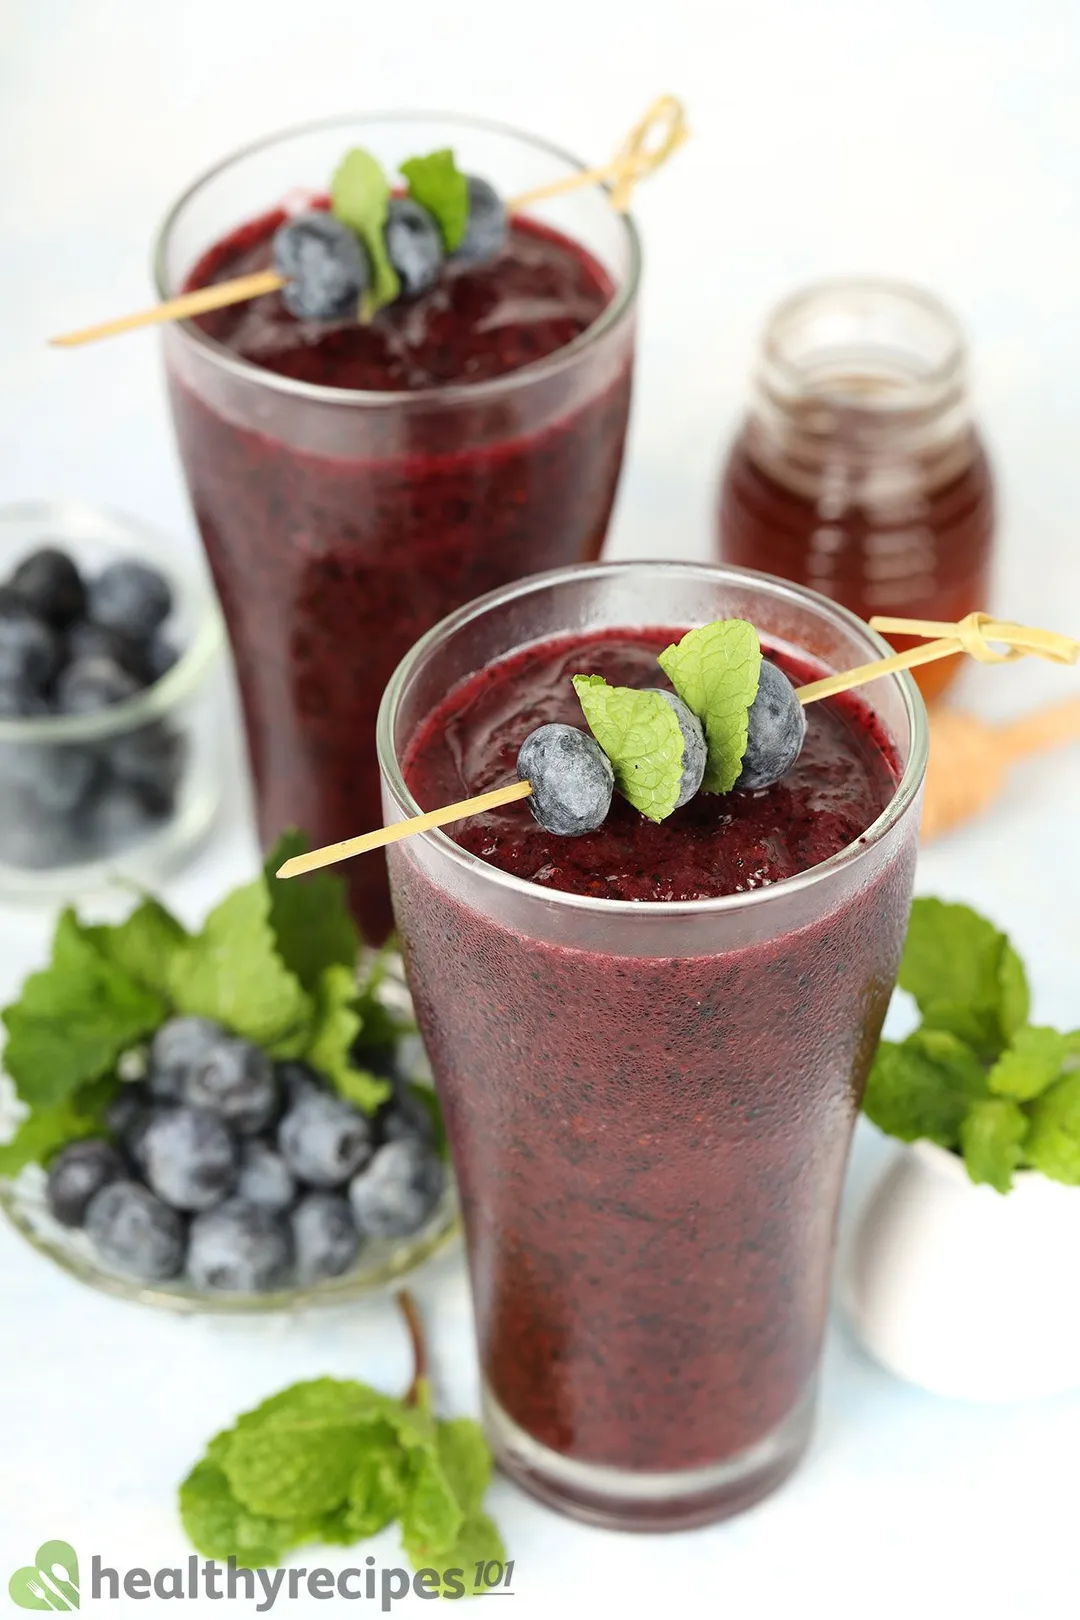 Two glasses of blueberry smoothie garnished with blueberry skewers and placed near a small plate of blueberries and a small jar of honey.